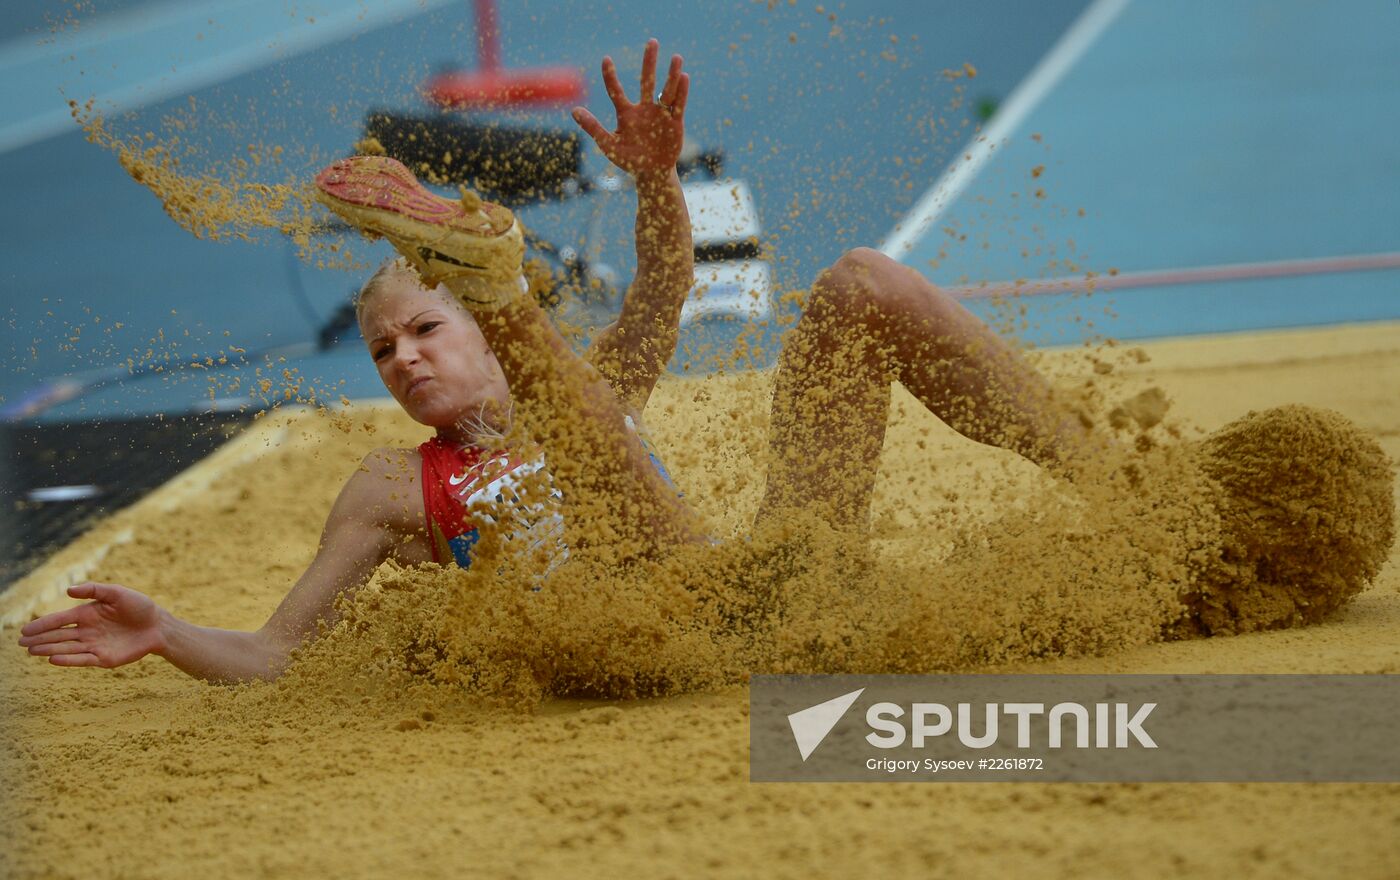 2013 IAAF World Championships. Day 2. Evening session